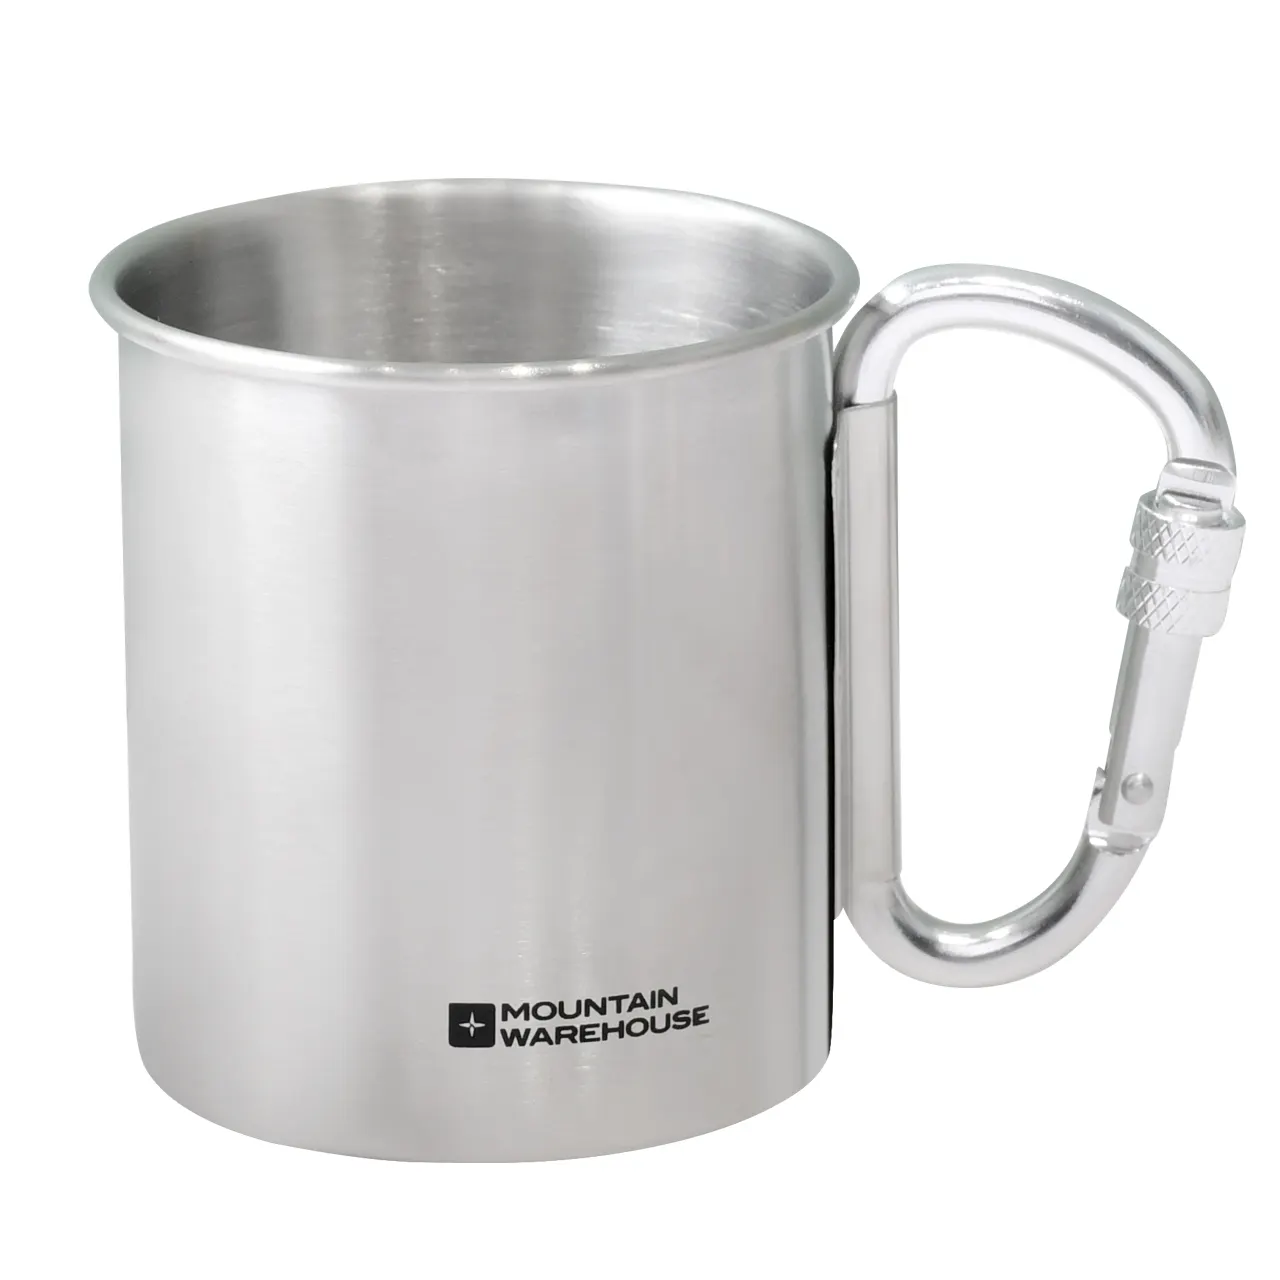 Factory wholesale price outdoor 300ml /10oz Handled Stainless Steel Mug with carabiner for Coffee Camping Hiking and Climbing